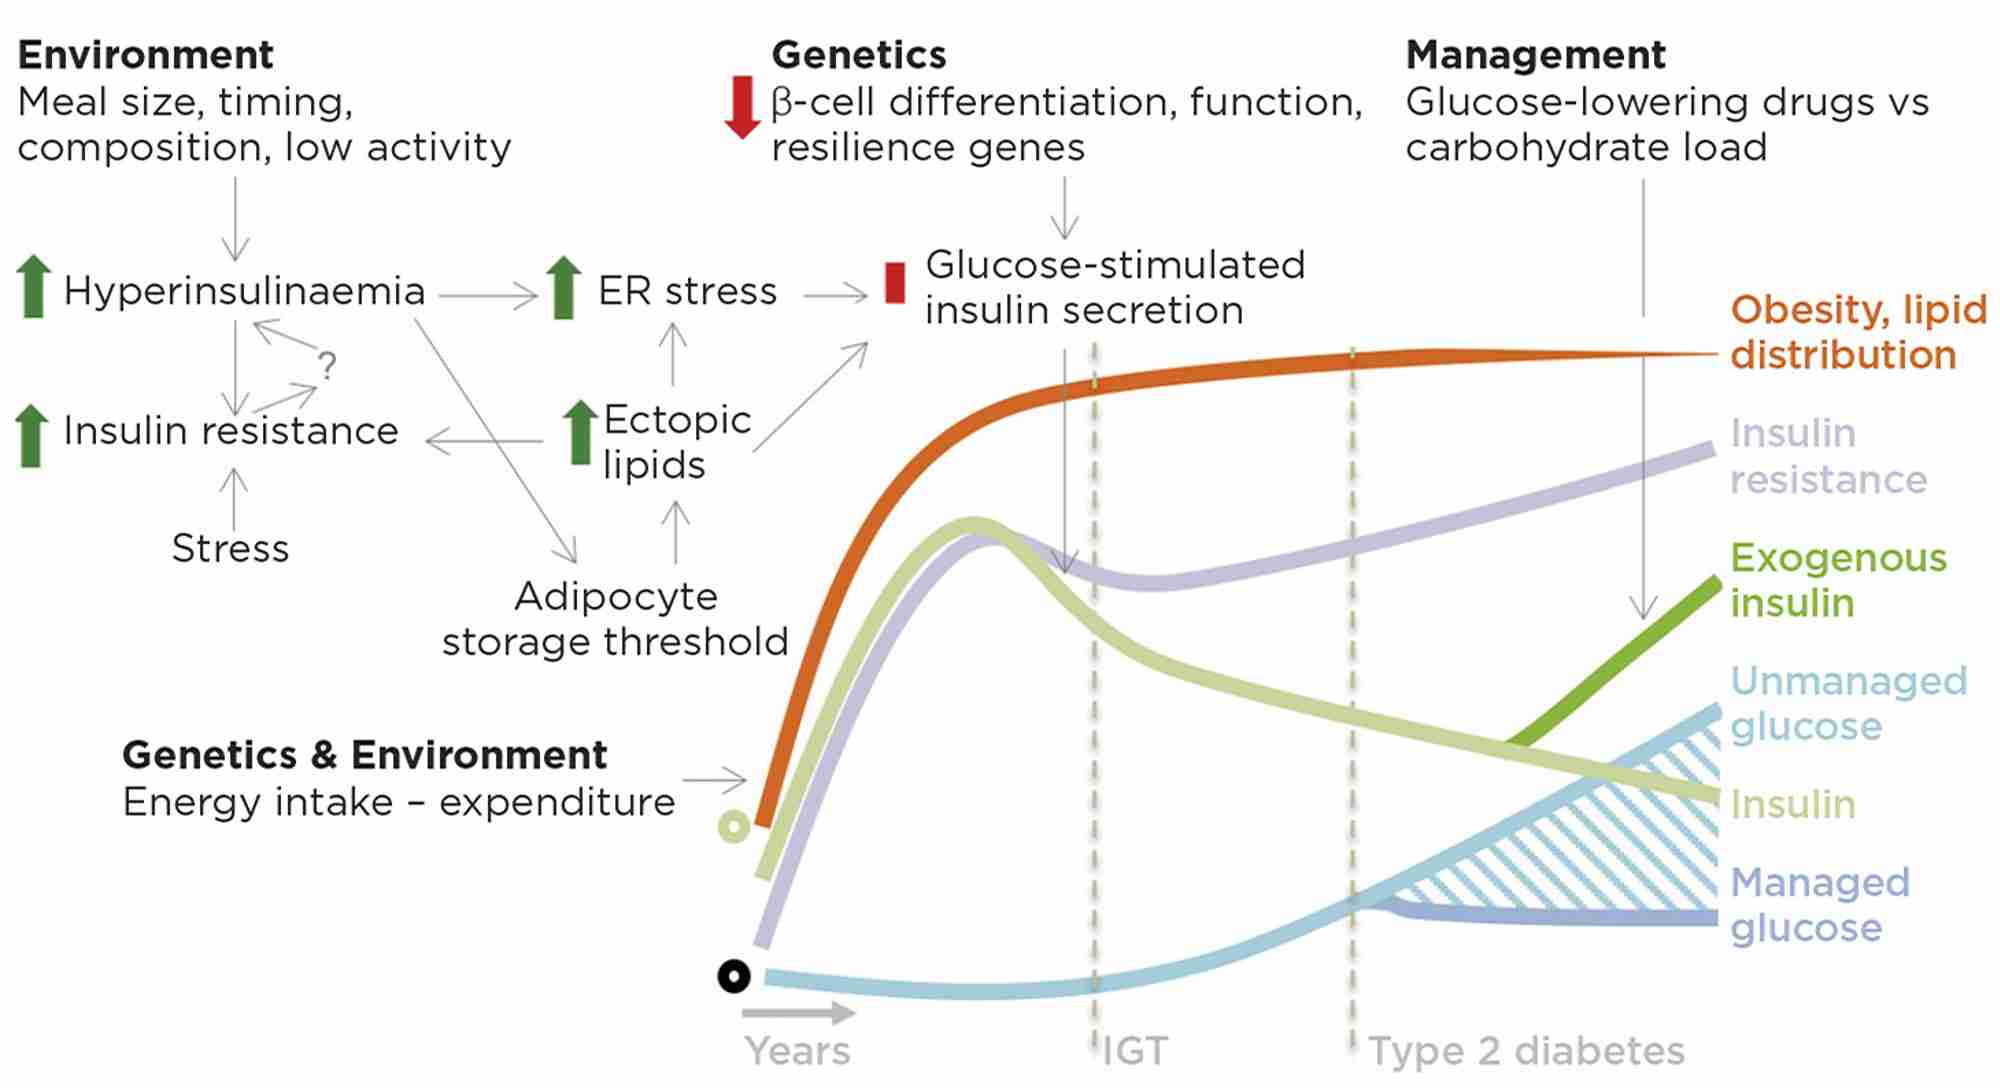 Figure 1. Roles for insulin in insulin resistance, obesity and type 2 diabetes. On a background of genetic and environmental factors that increase food intake, we propose that meal size, timing and macronutrient composition stimulate excess insulin production/secretion in fasting and fed states. Hyperinsulinaemia may contribute to insulin resistance through receptor and post-receptor desensitisation, possibly further promoting hyperinsulinaemia via unknown mechanisms. Hyperinsulinaemia drives lipid storage in adipocytes, which eventually leads to adipocyte dysfunction and lipid spillover into other tissues. Ectopic lipids are deposited in many tissues including the pancreas where, together with the increased insulin demand, they produce endoplasmic reticulum (ER) stress and metabolic dysfunction, resulting in impaired glucose-stimulated insulin secretion. Impaired insulin secretion in response to glucose begets impaired glucose tolerance (IGT) and eventually type 2 diabetes. The late stages of type 2 diabetes are associated with more severe changes in β-cell differentiation state and cell death. Type 2 diabetes management is a balance between glucose-lowering drugs, including insulin, and glucose load, which can be modified by diet. Green circle denotes normal insulin; black circle represents the norm for other features. &#169; J D Johnson &amp; J A Kushner